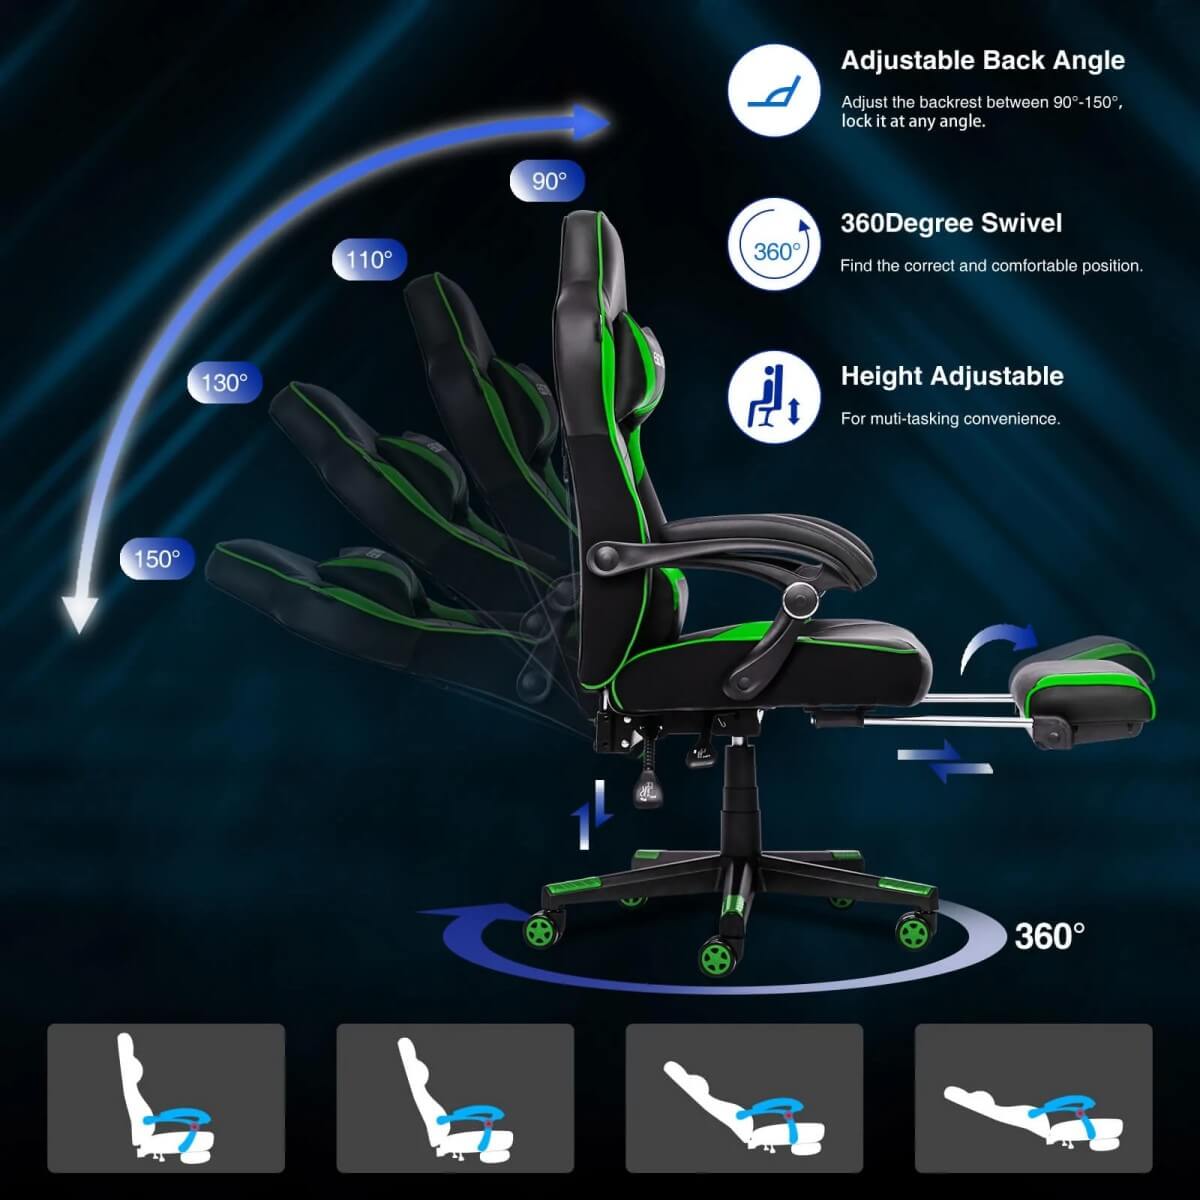 Elecwish Video Game Chairs Green Gaming Chair With Footrest OC087 can adjustback angle, height and have 360 degree swivel